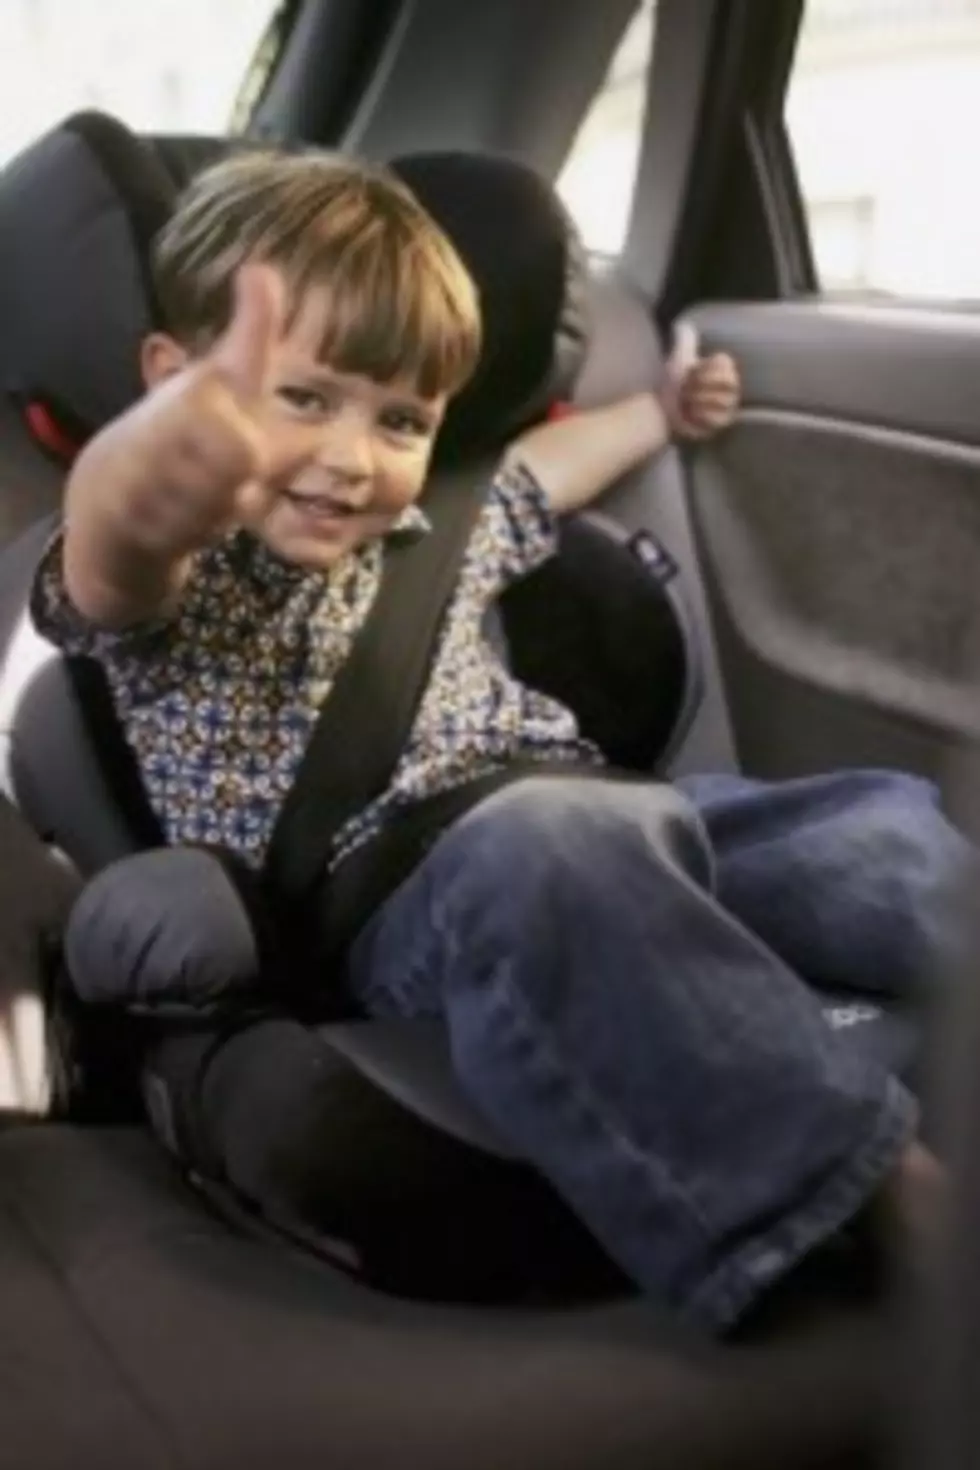 Two words for safe kids &#8211; CAR SEATS!